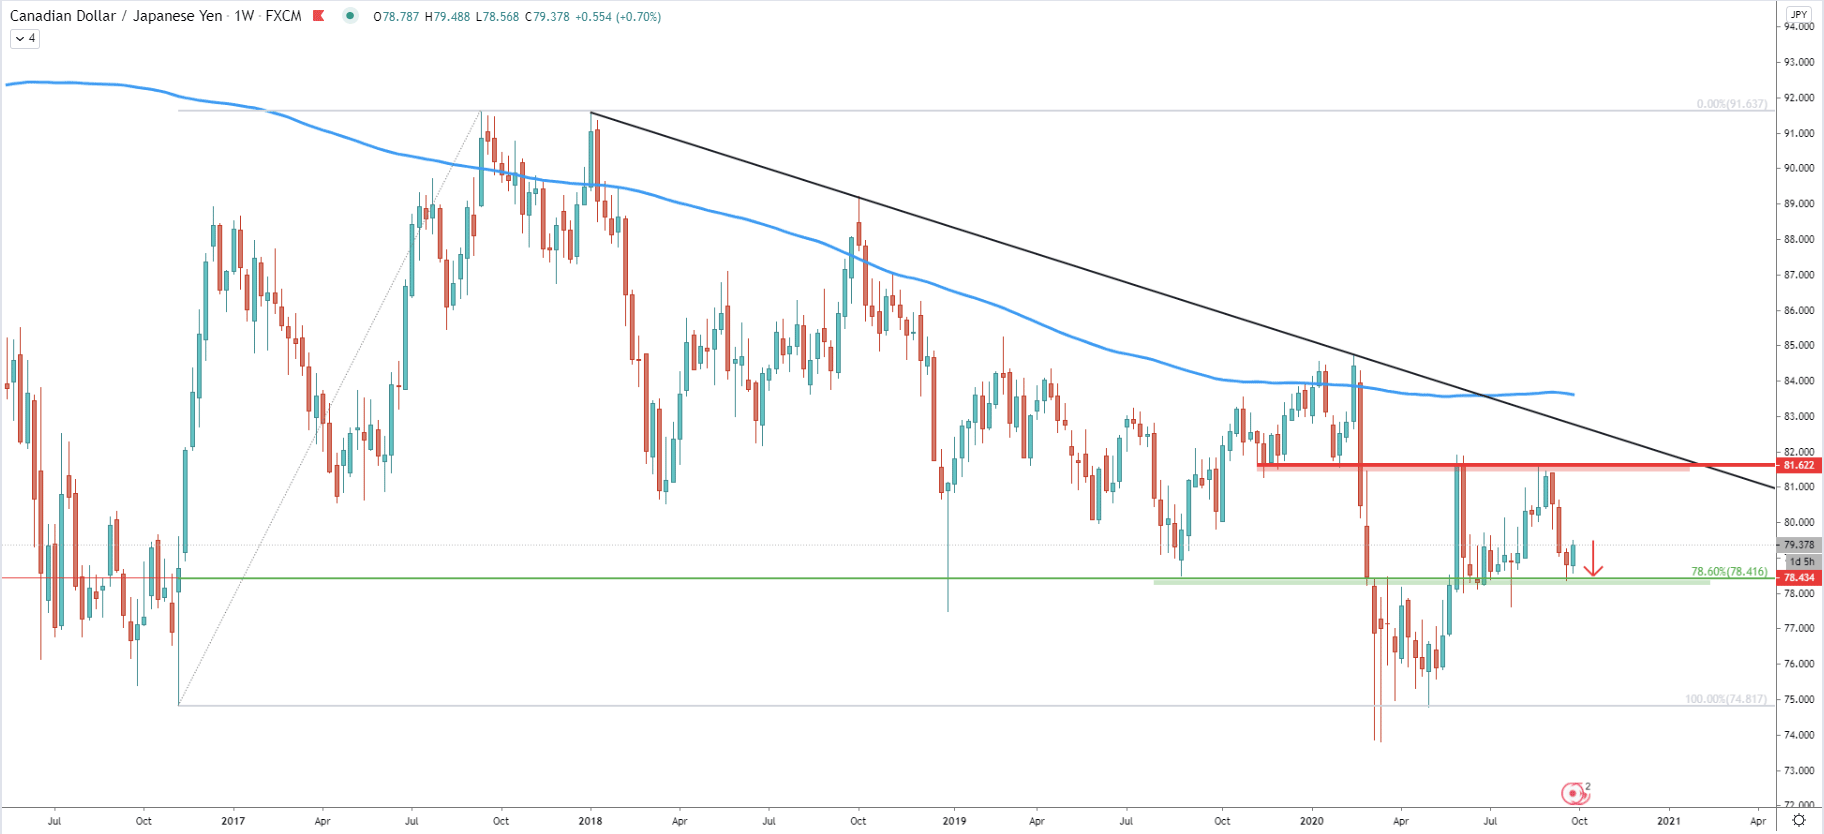 CAD/JPY Weekly Technical Analysis 1 Oct 2020